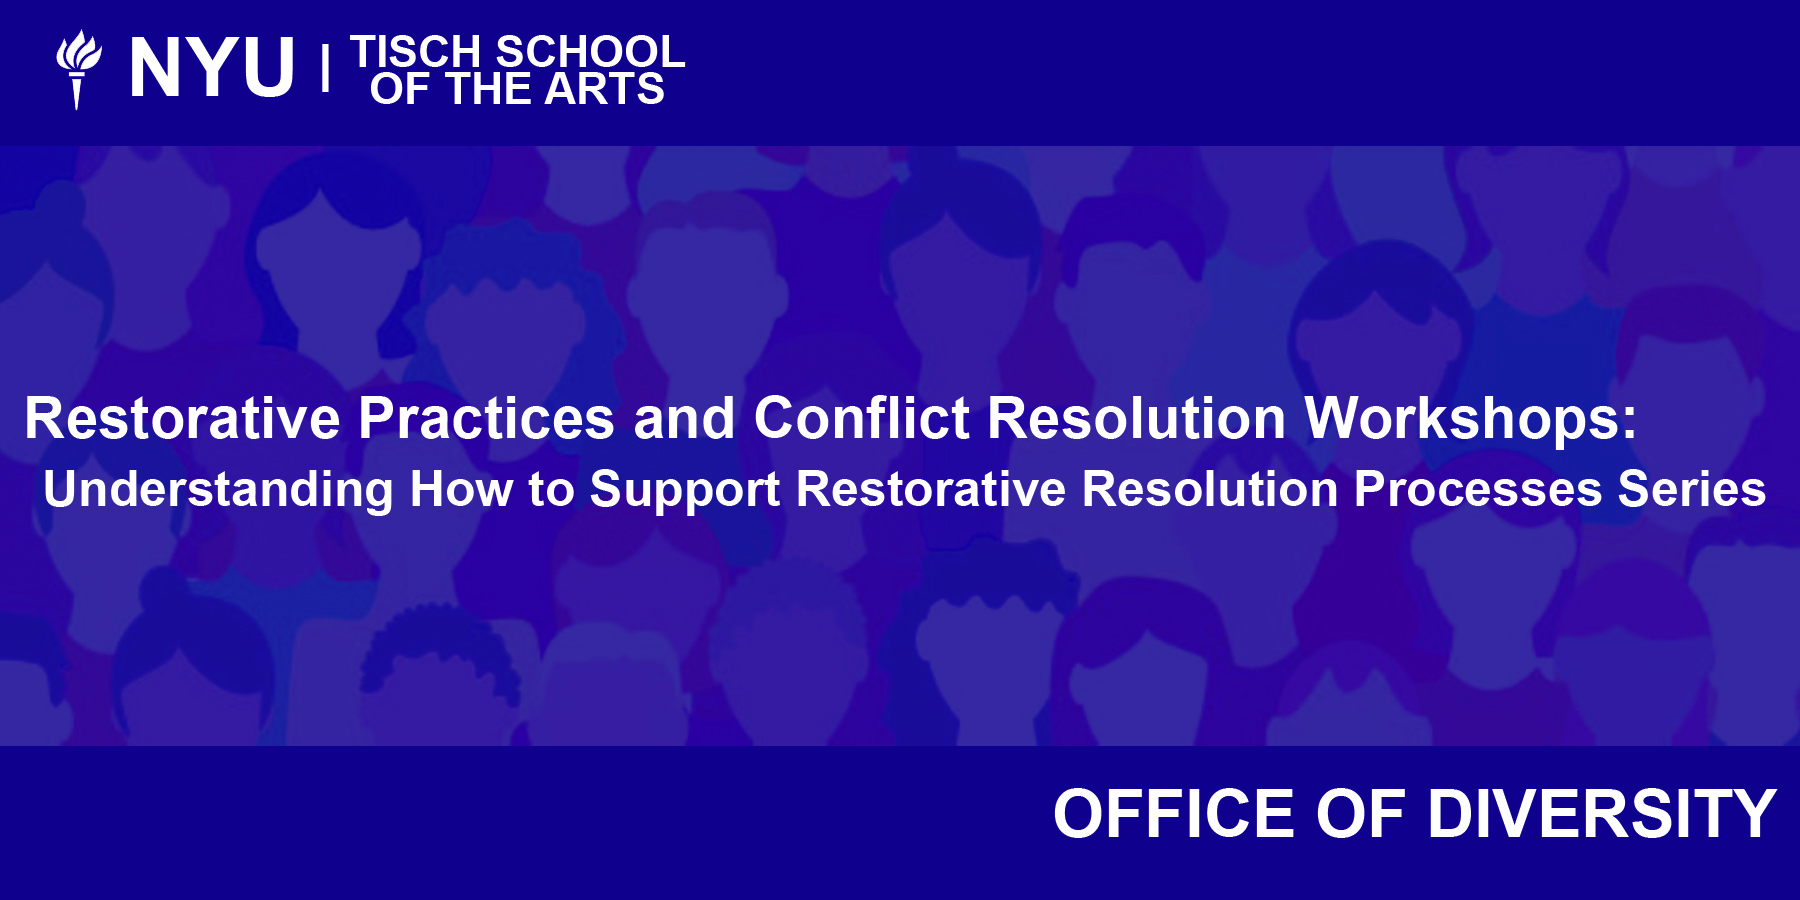 Support Restorative Resolution Processes on Office of Diversity background